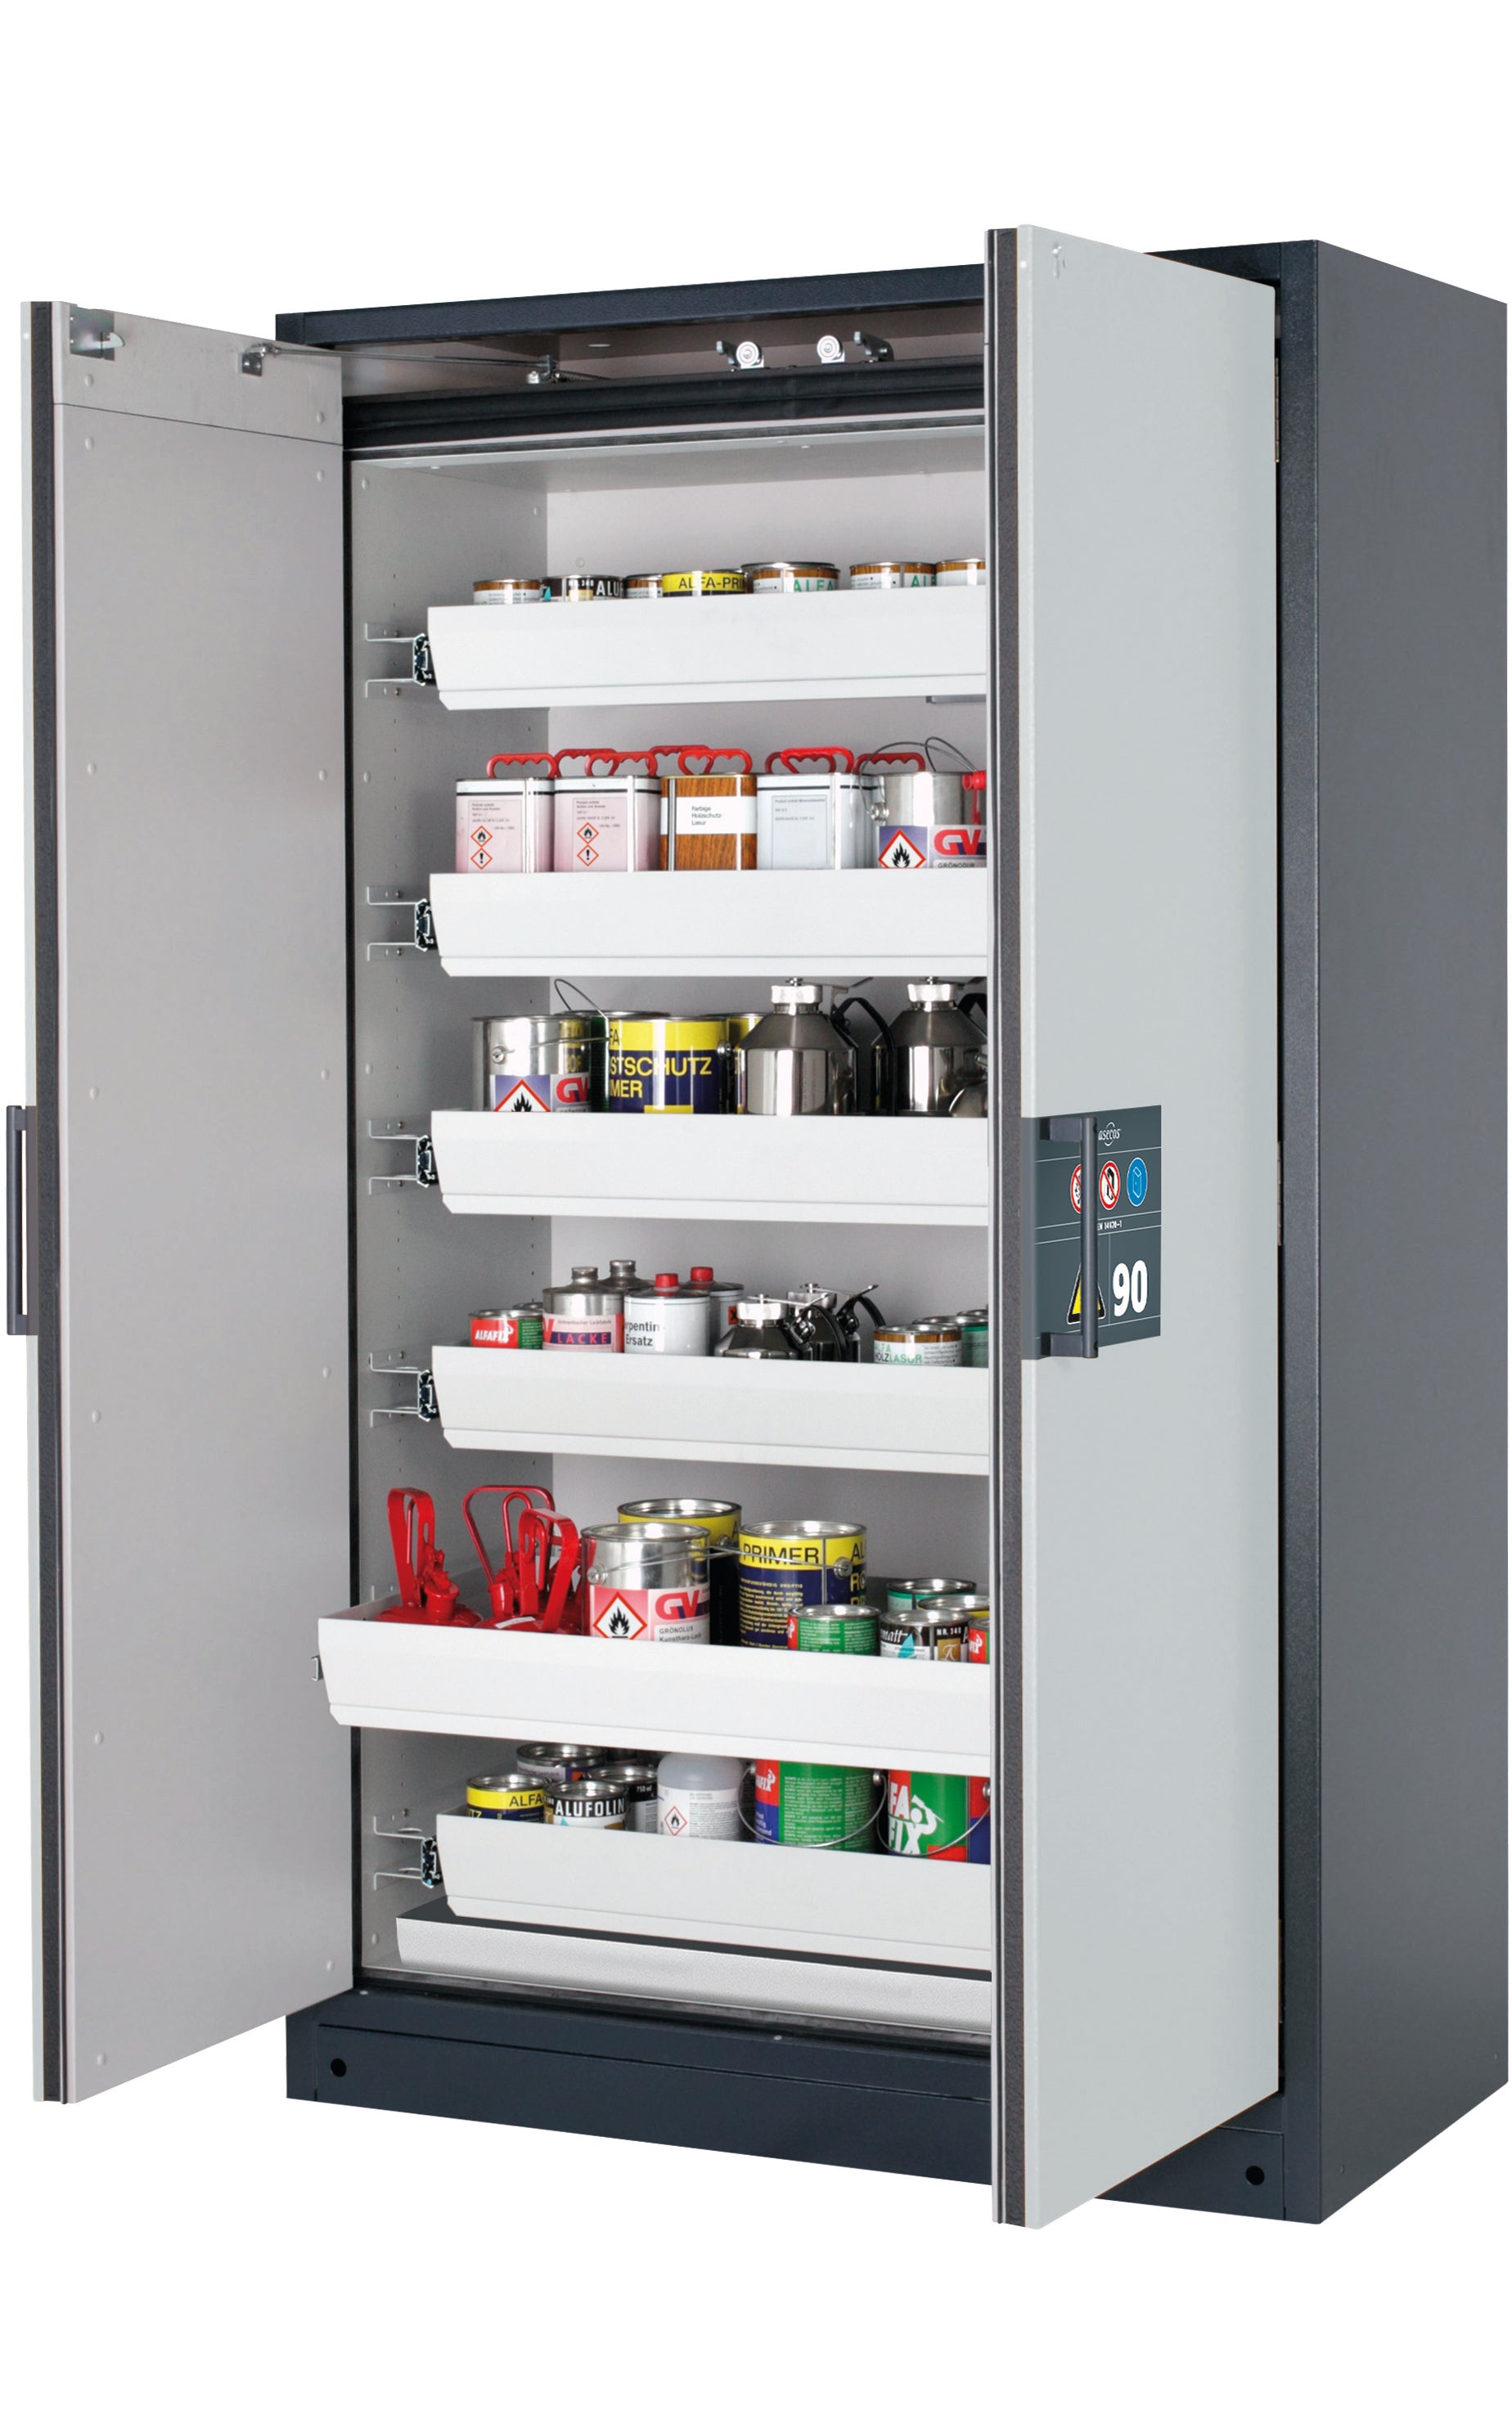 Type 90 safety storage cabinet Q-CLASSIC-90 model Q90.195.120 in light grey RAL 7035 with 6x drawer (standard) (sheet steel),